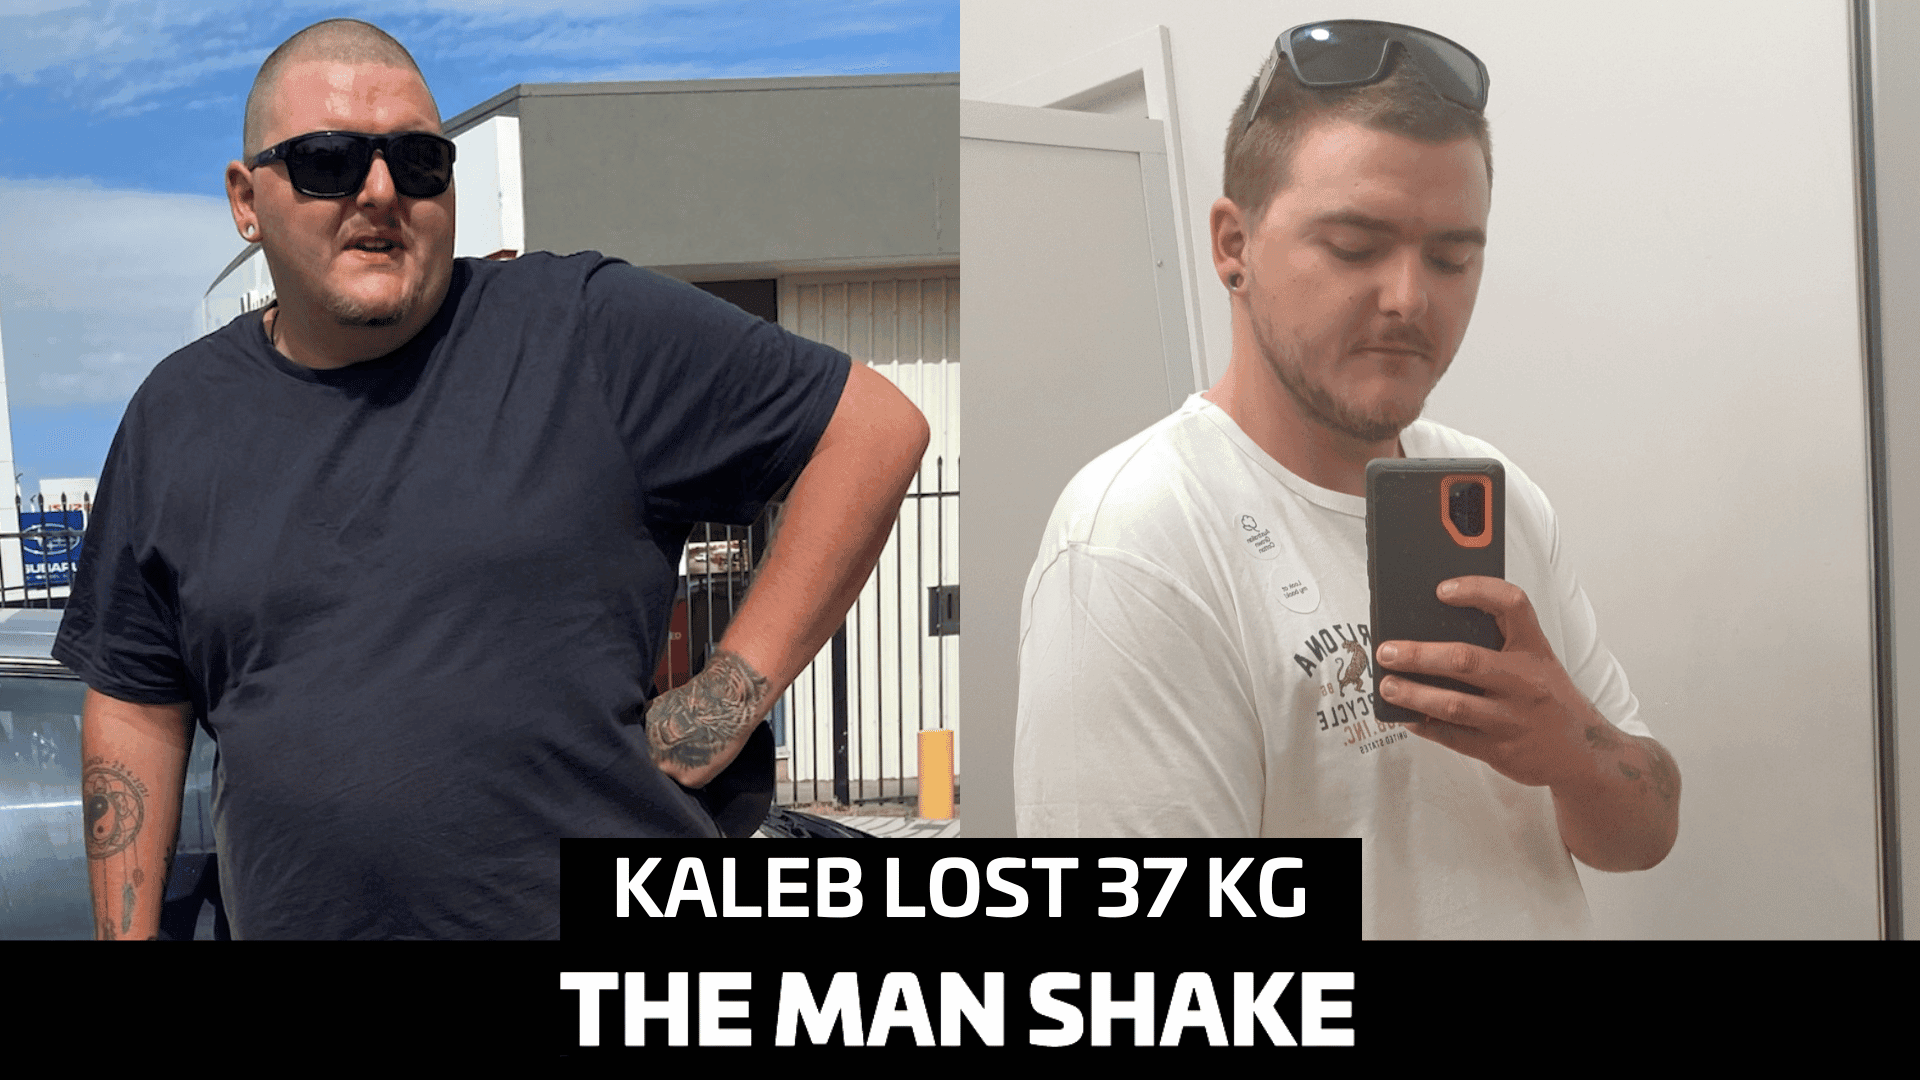 Kaleb turned his life around and lost 37kgs!